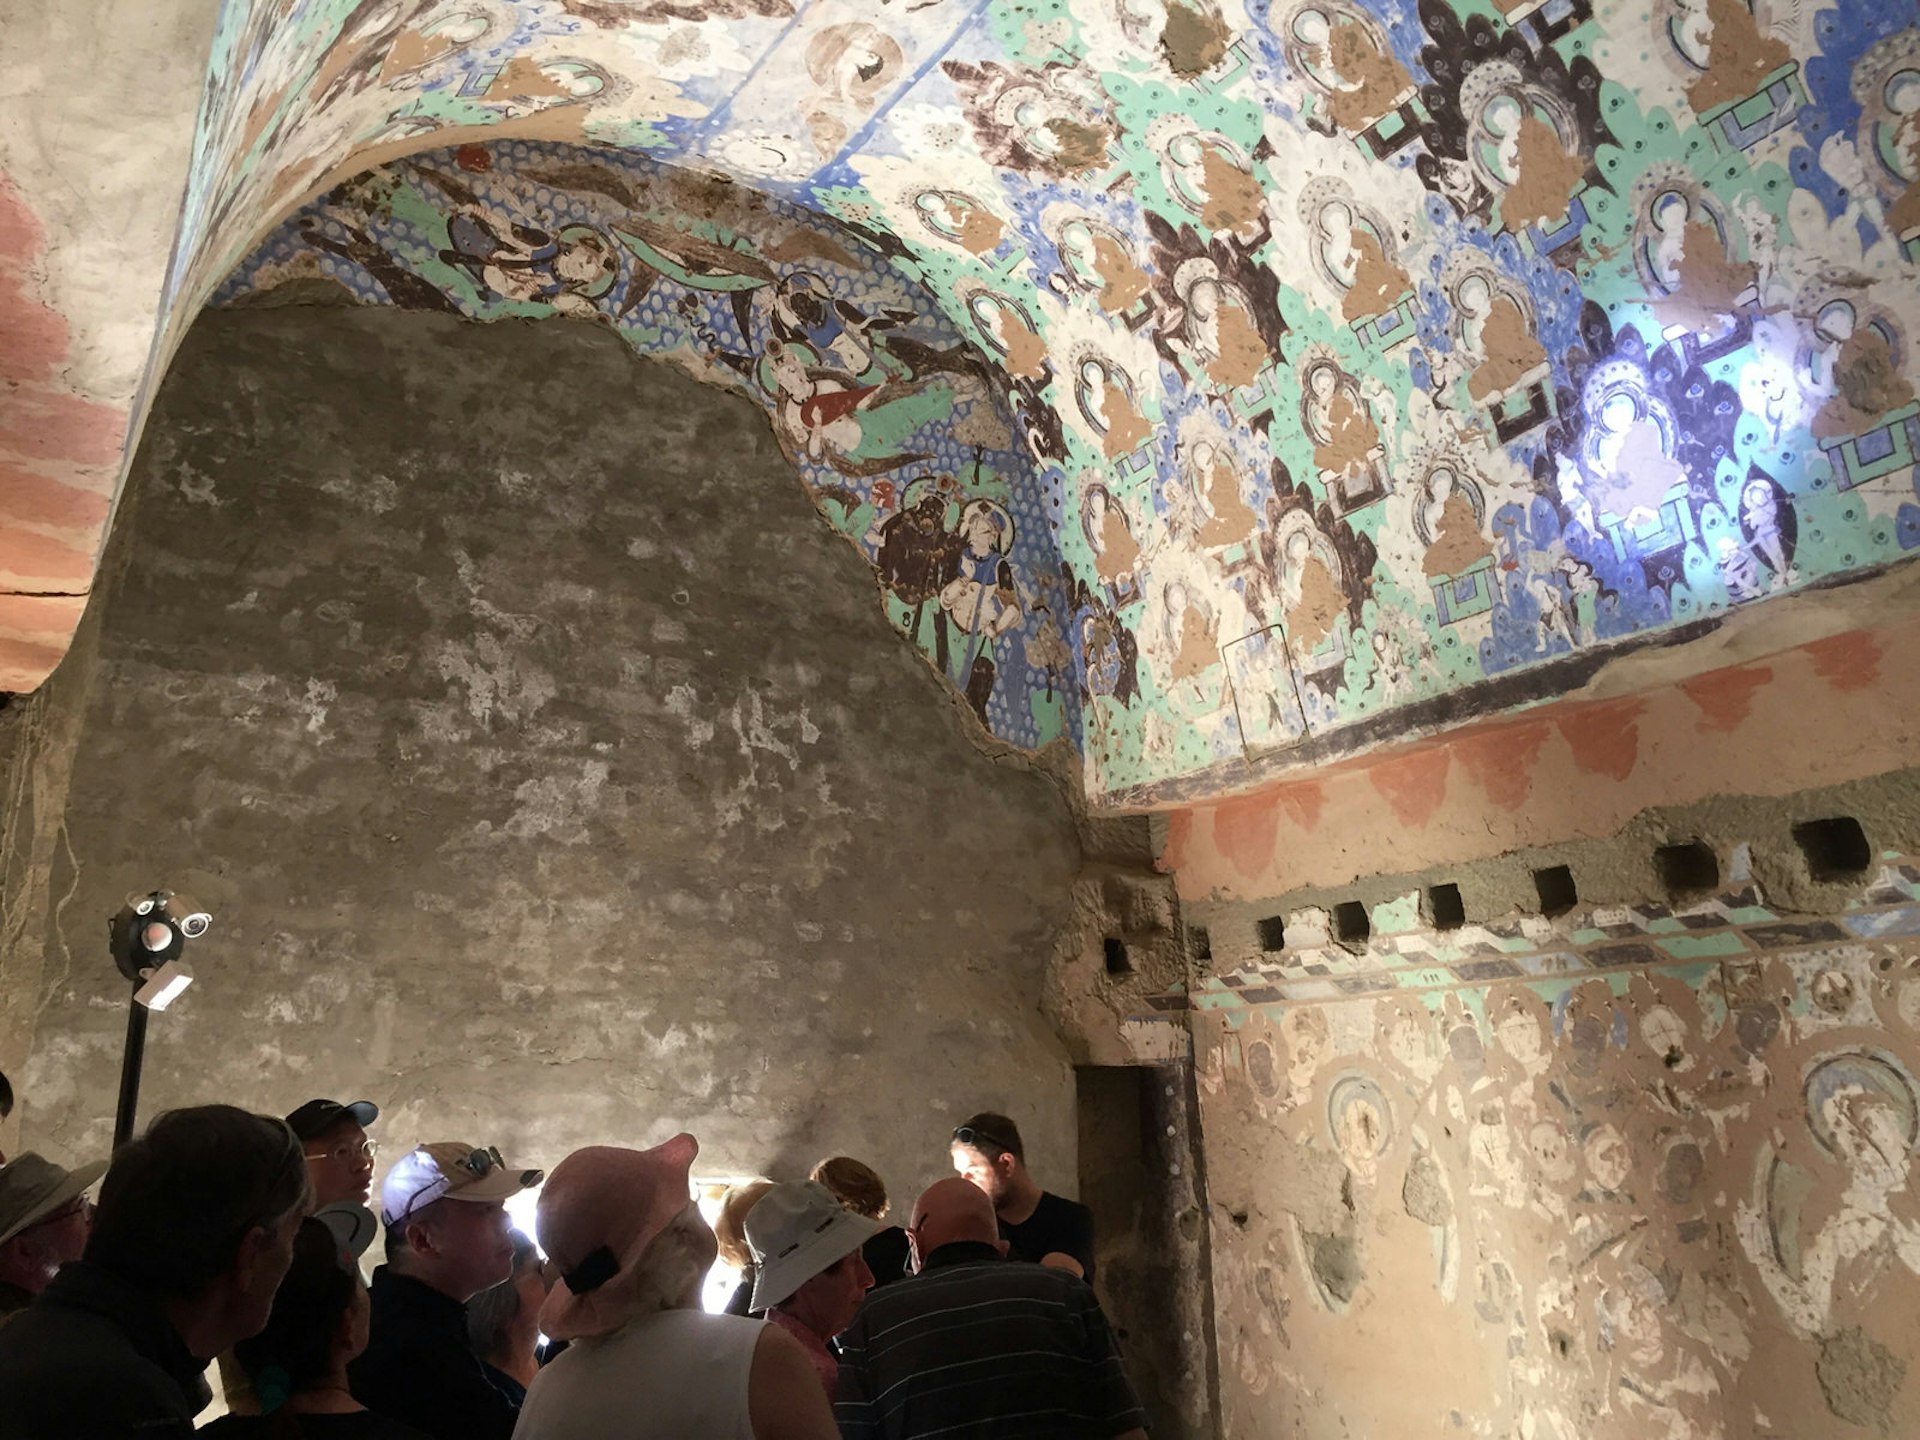 A group of visitors huddled below left stare up at an arched cave ceiling with blue, green and brown Buddhist murals illuminated by spotlights.